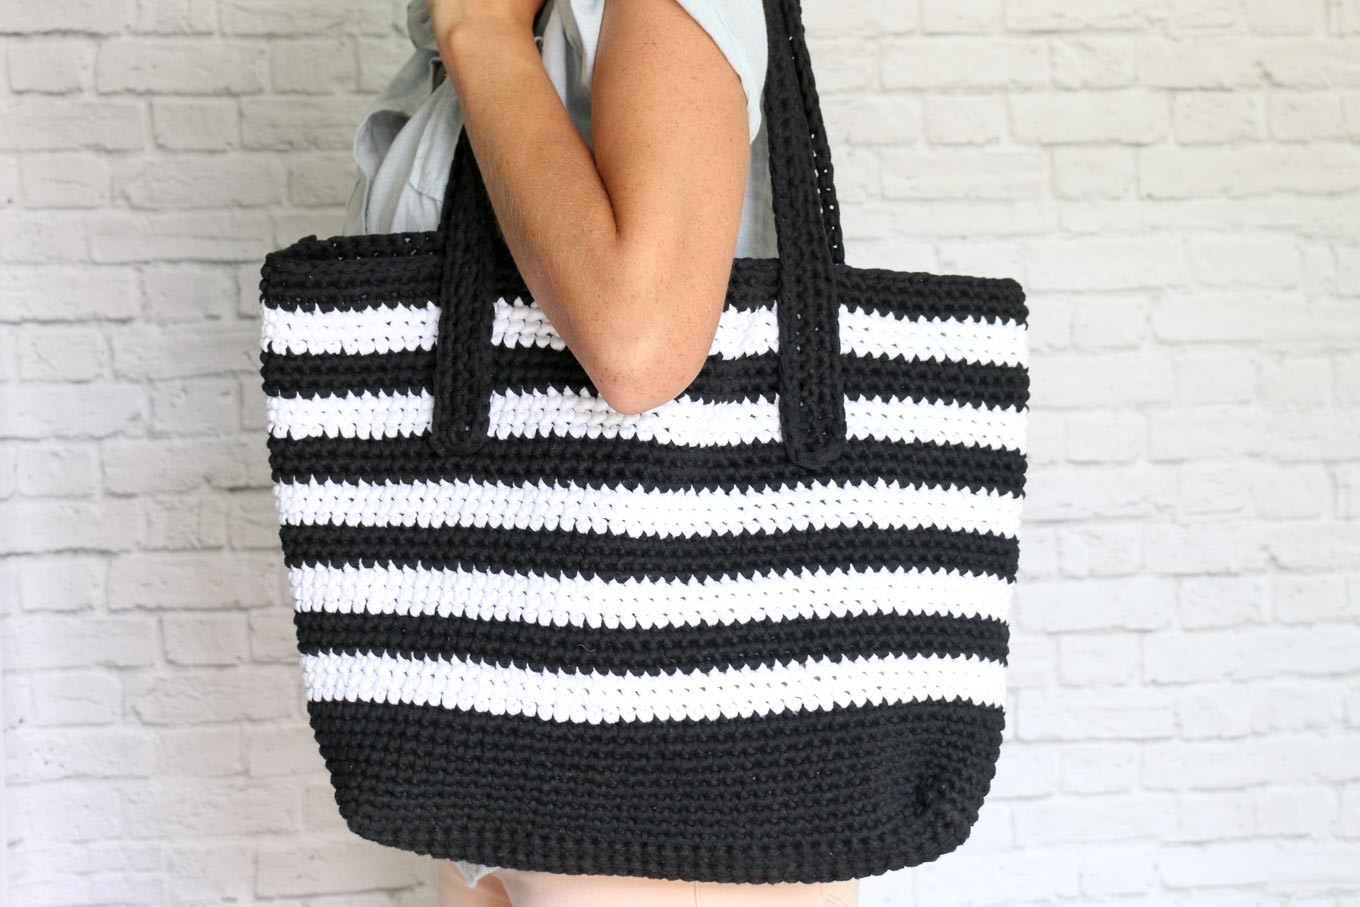 The Audrey Tote Crochet Kit